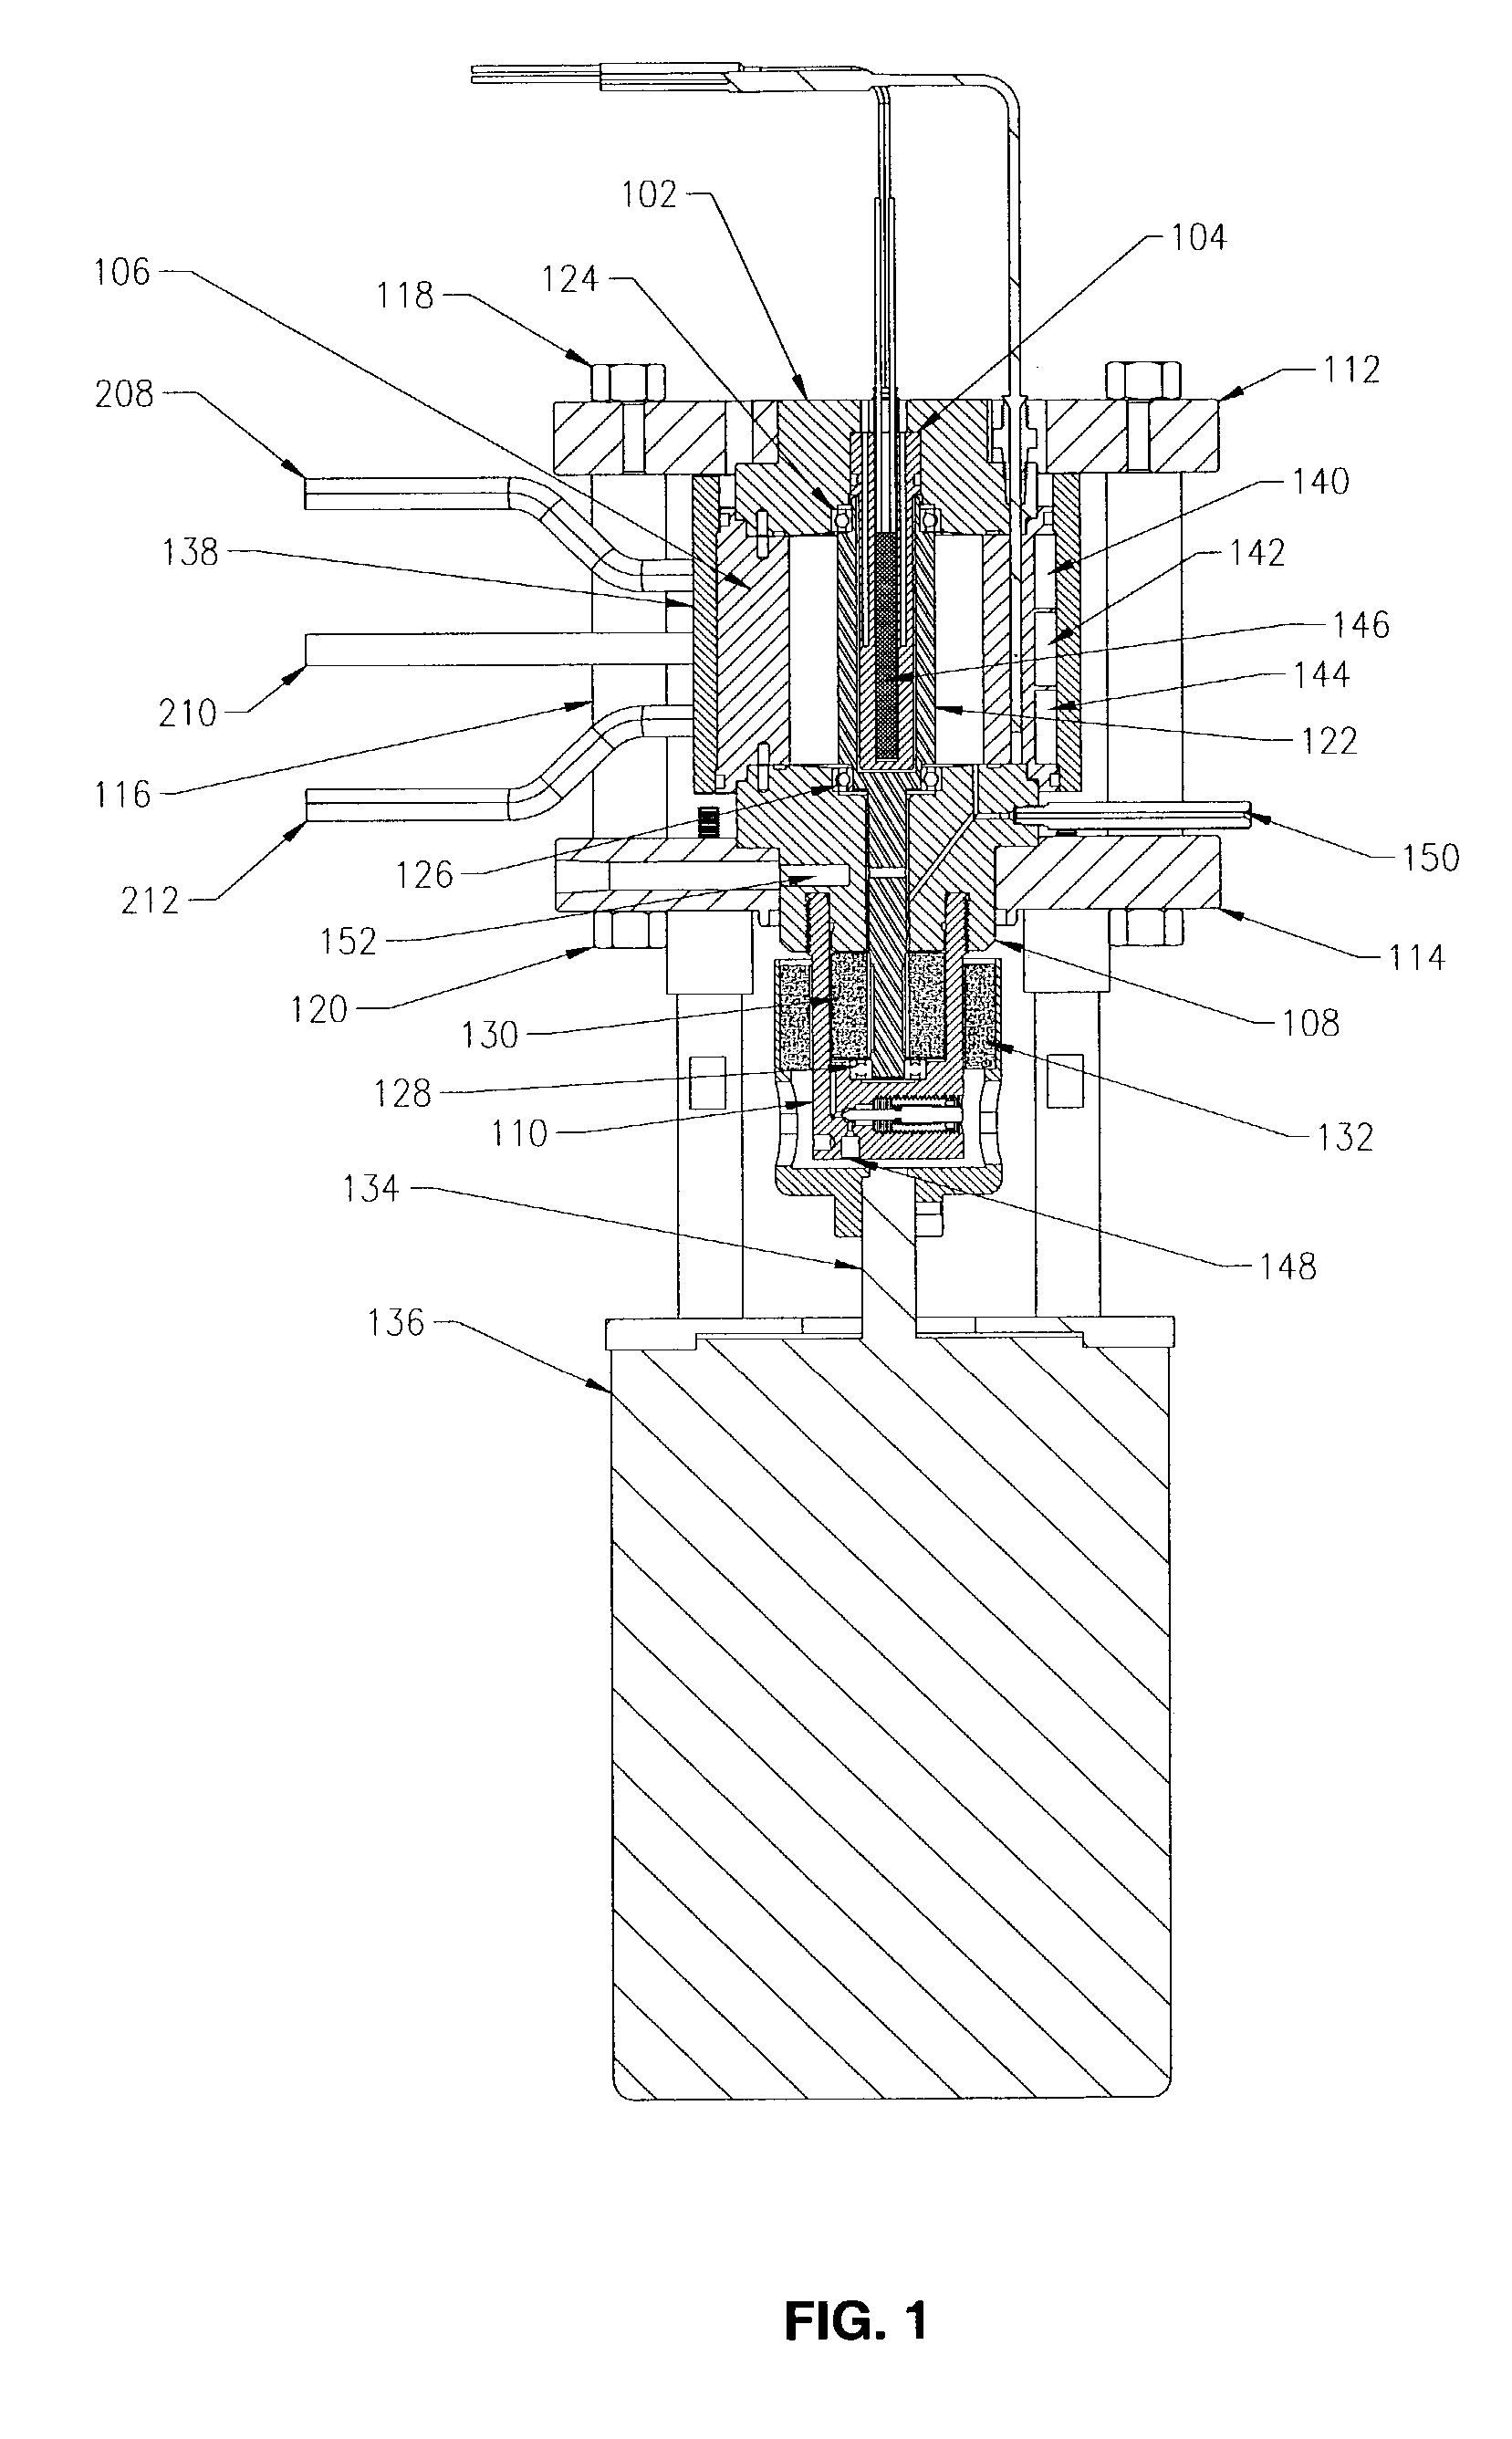 Couette device and method to study solids deposition from flowing fluids